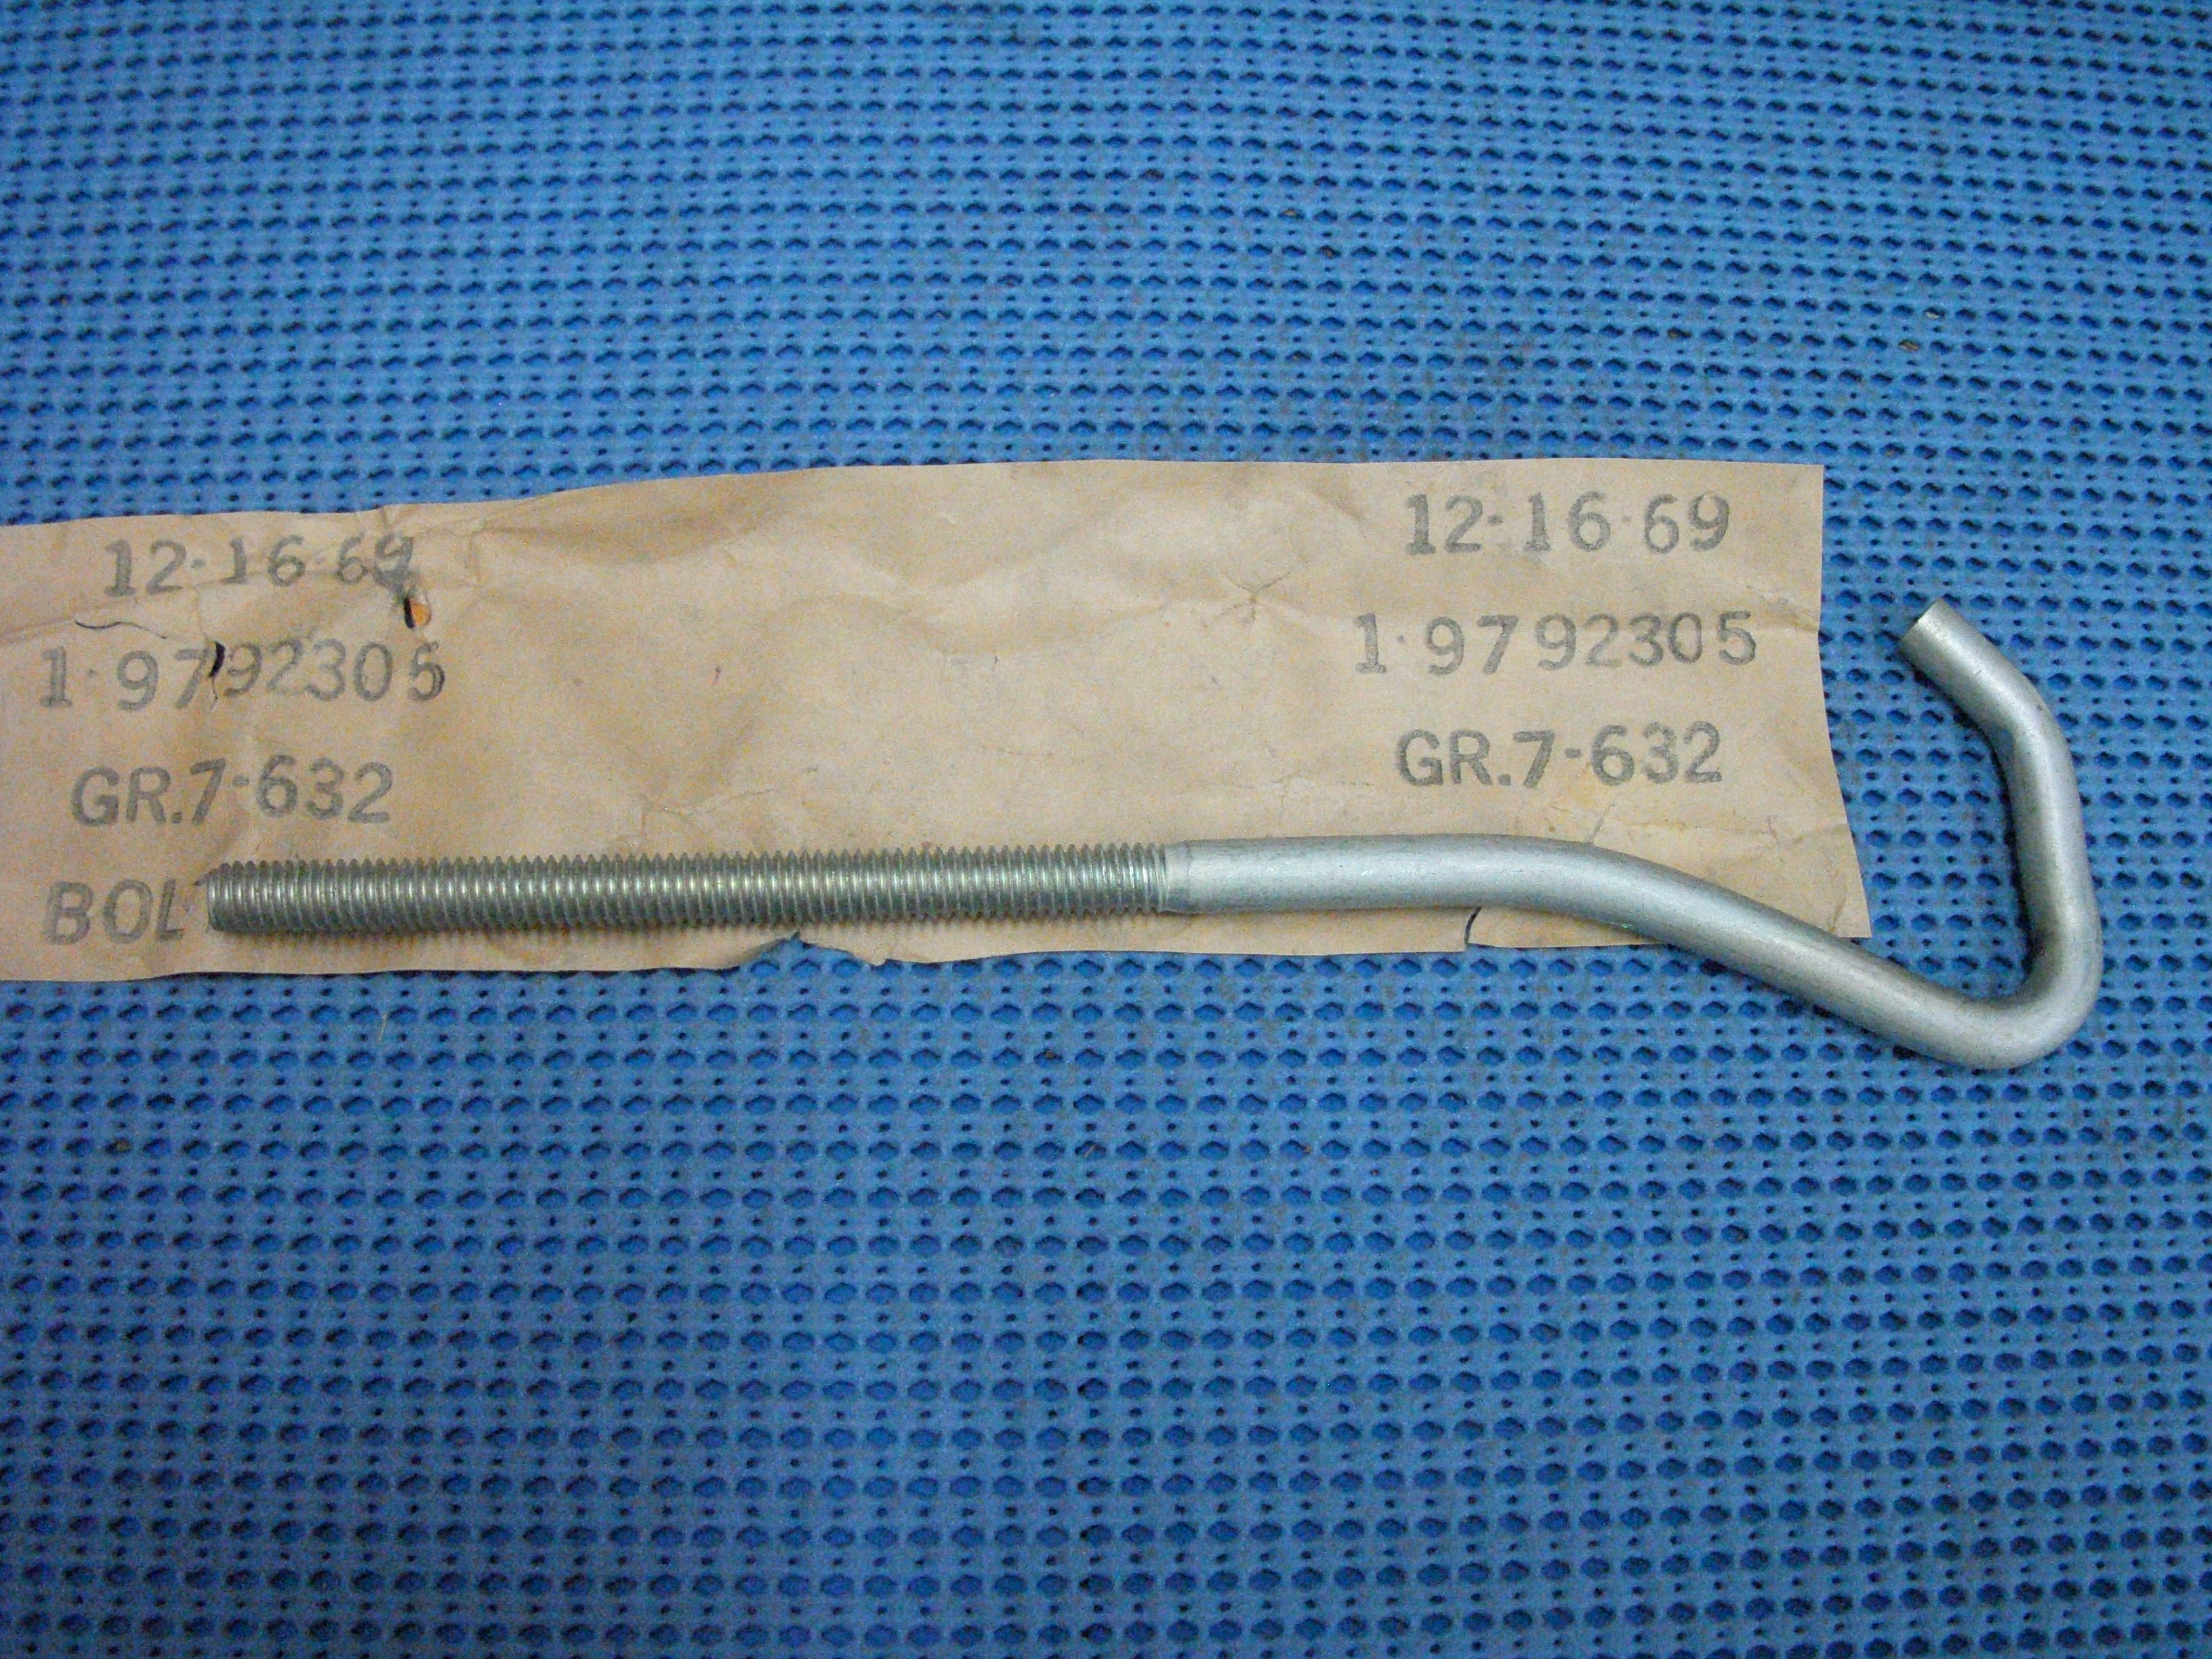 1969 - 1974 Chevrolet Spare Wheel and Tire Carrier Bolt NOS # 9792305